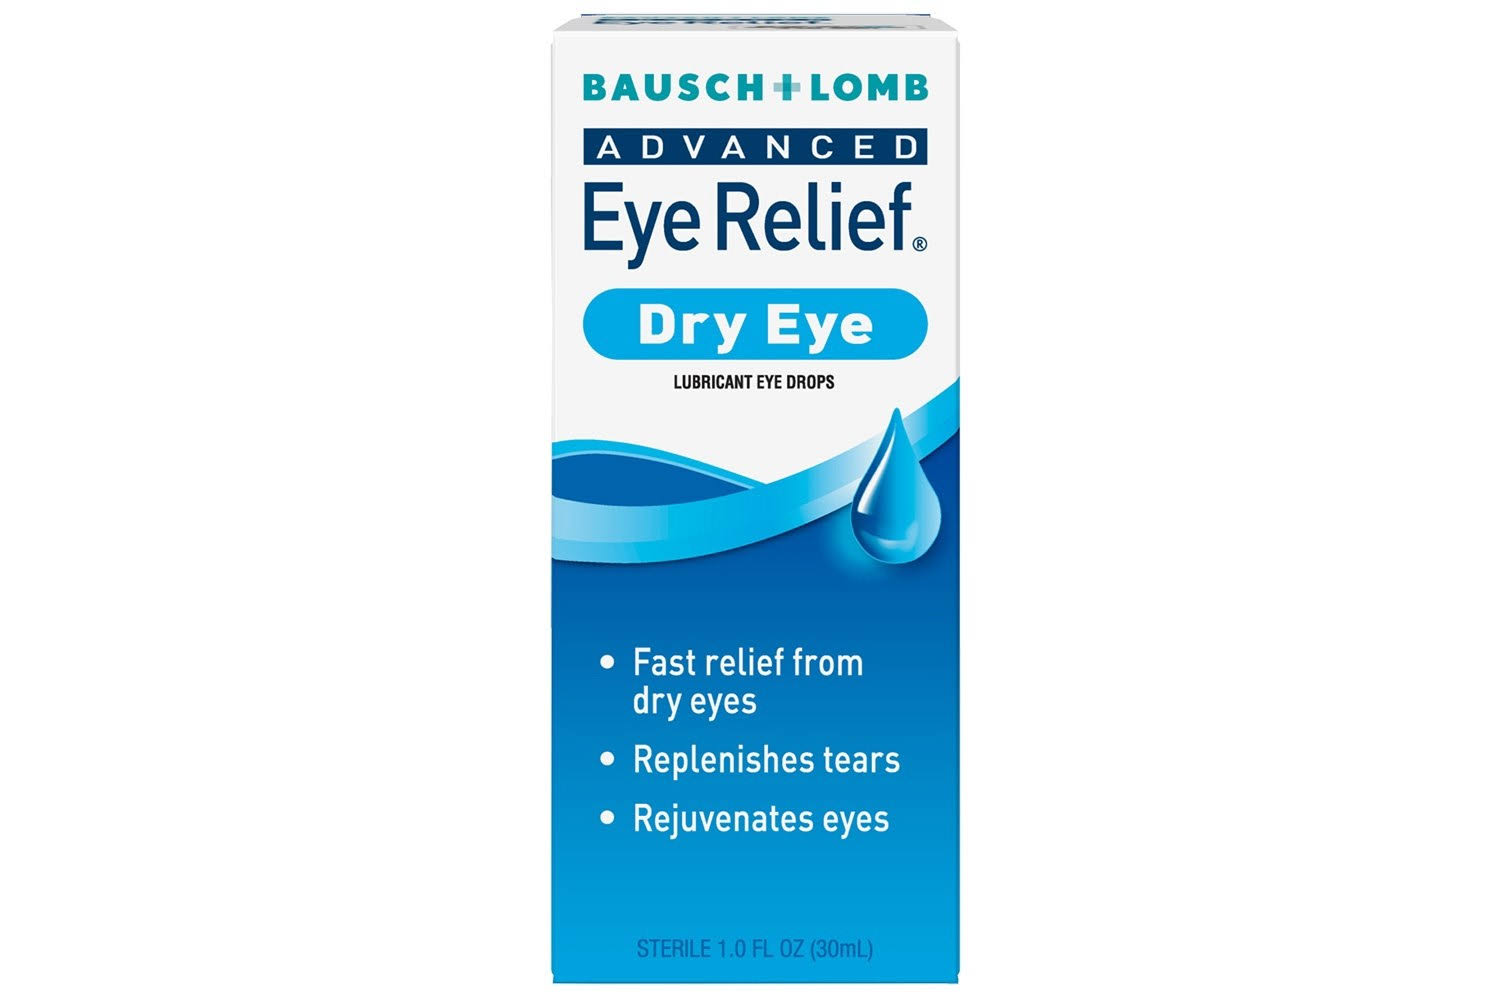 Bausch and Lomb Advanced Eye Relief Rejuvenation Lubricant Eye Drops - 1oz